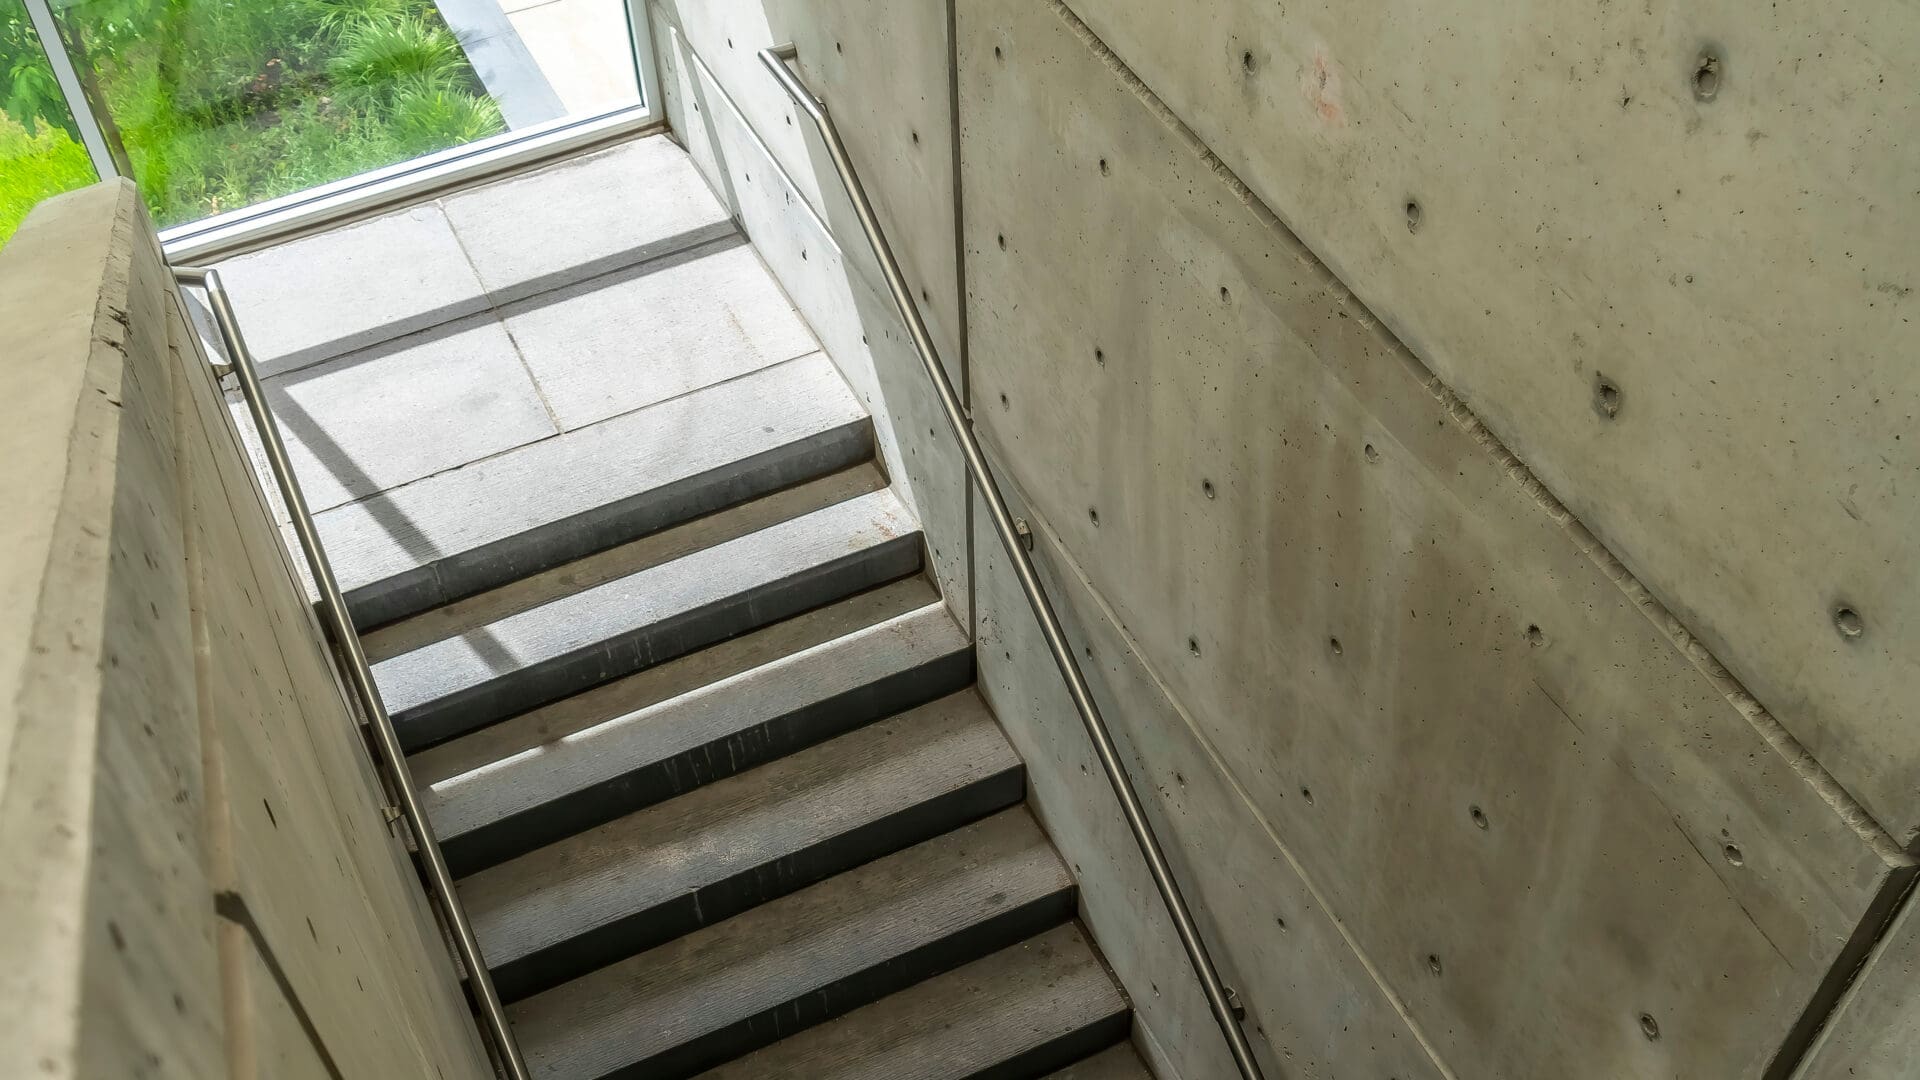 A view of some stairs in the middle of a building.